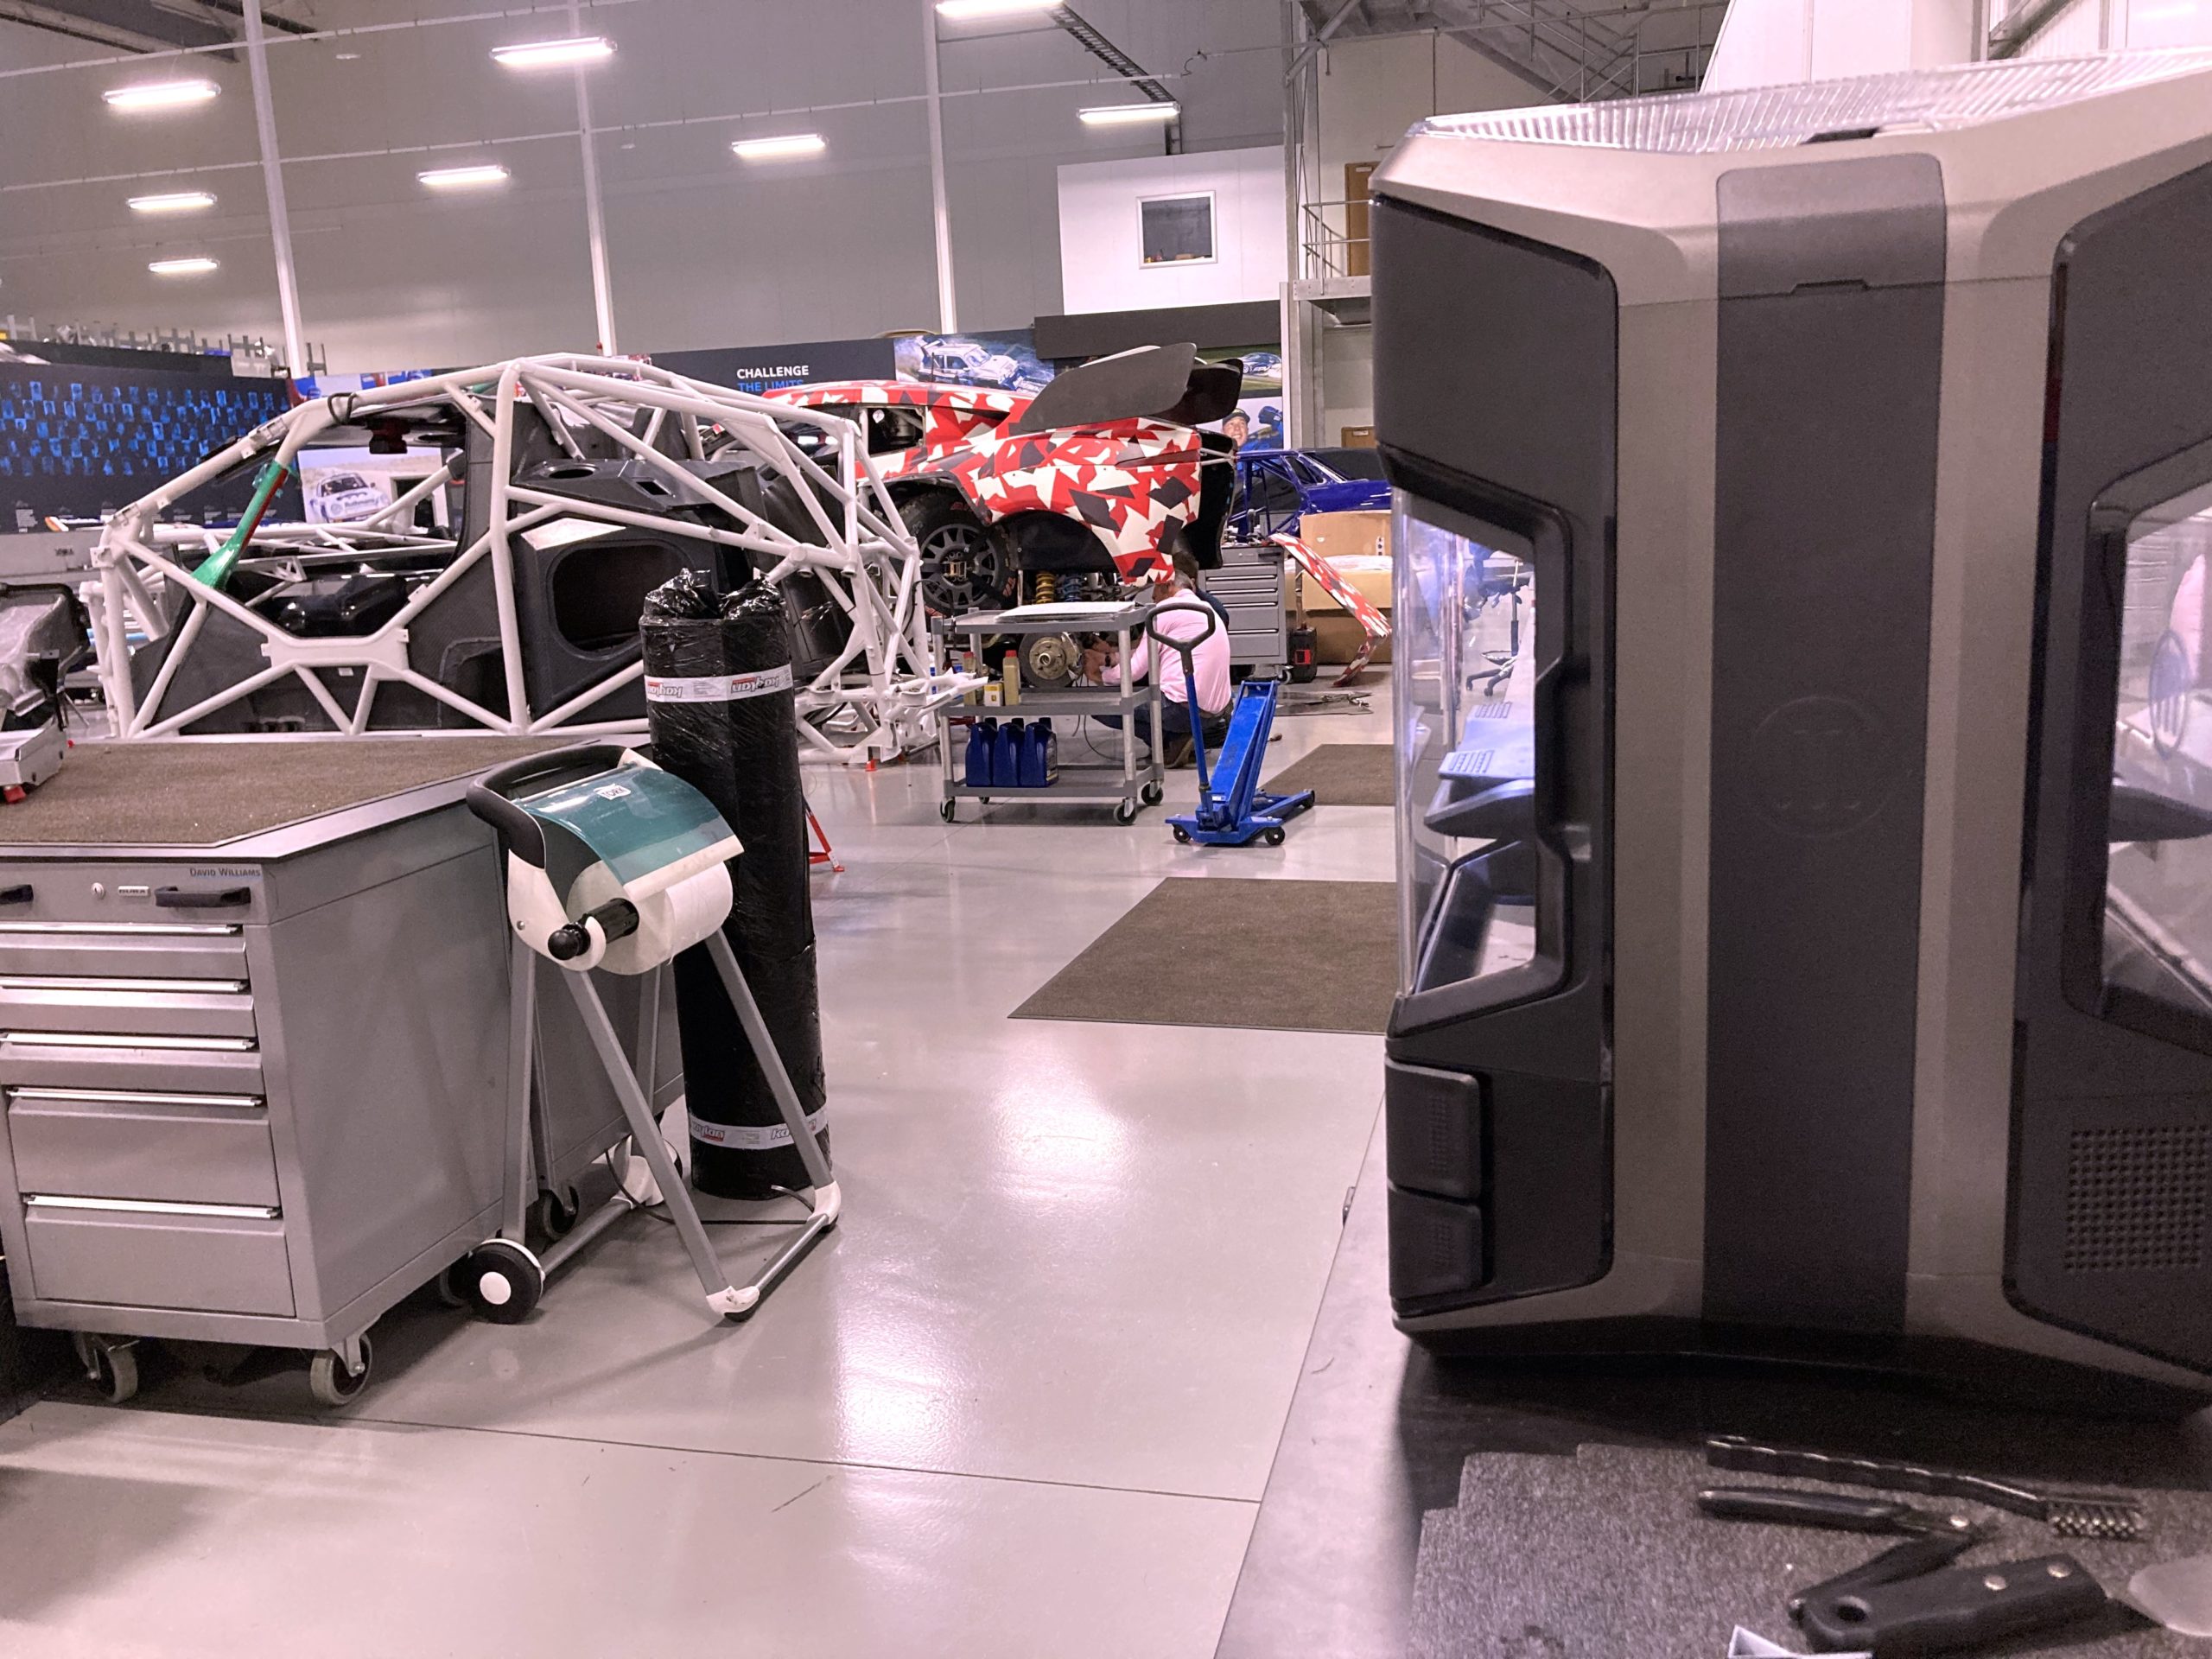 MakerBot METHOD X was used early on in Prodrive's UK facility for the design and production of complex Nylon Carbon Fiber parts for the Hunter.